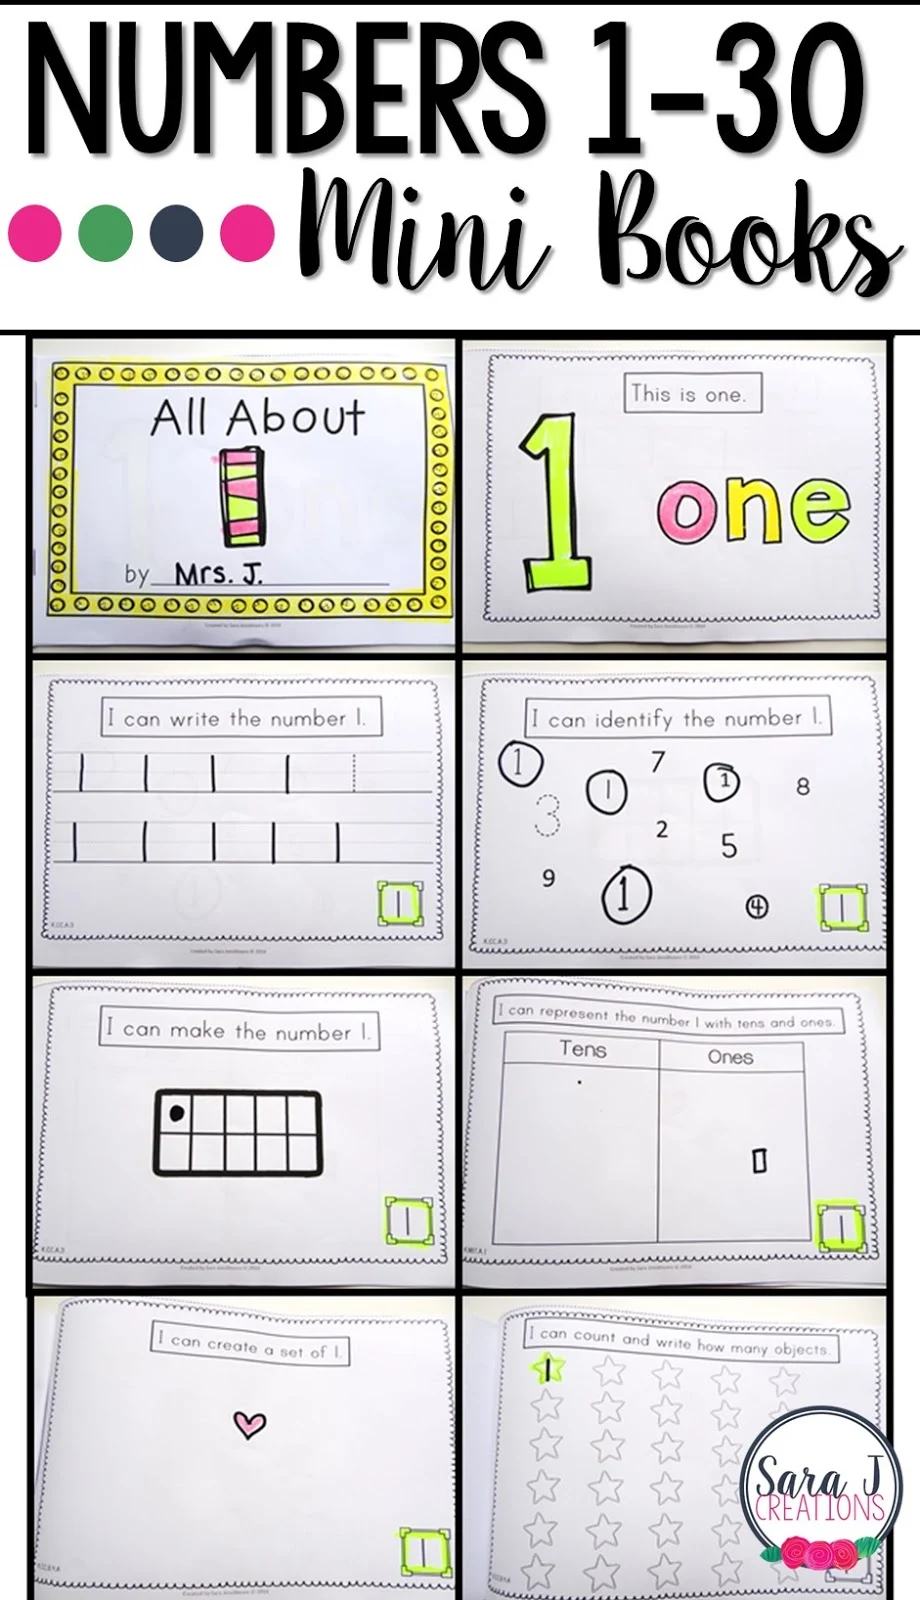 Number books are a great way to practice writing, identifying, counting, drawing, using tens frames and tens and ones to represent numbers 1-30.